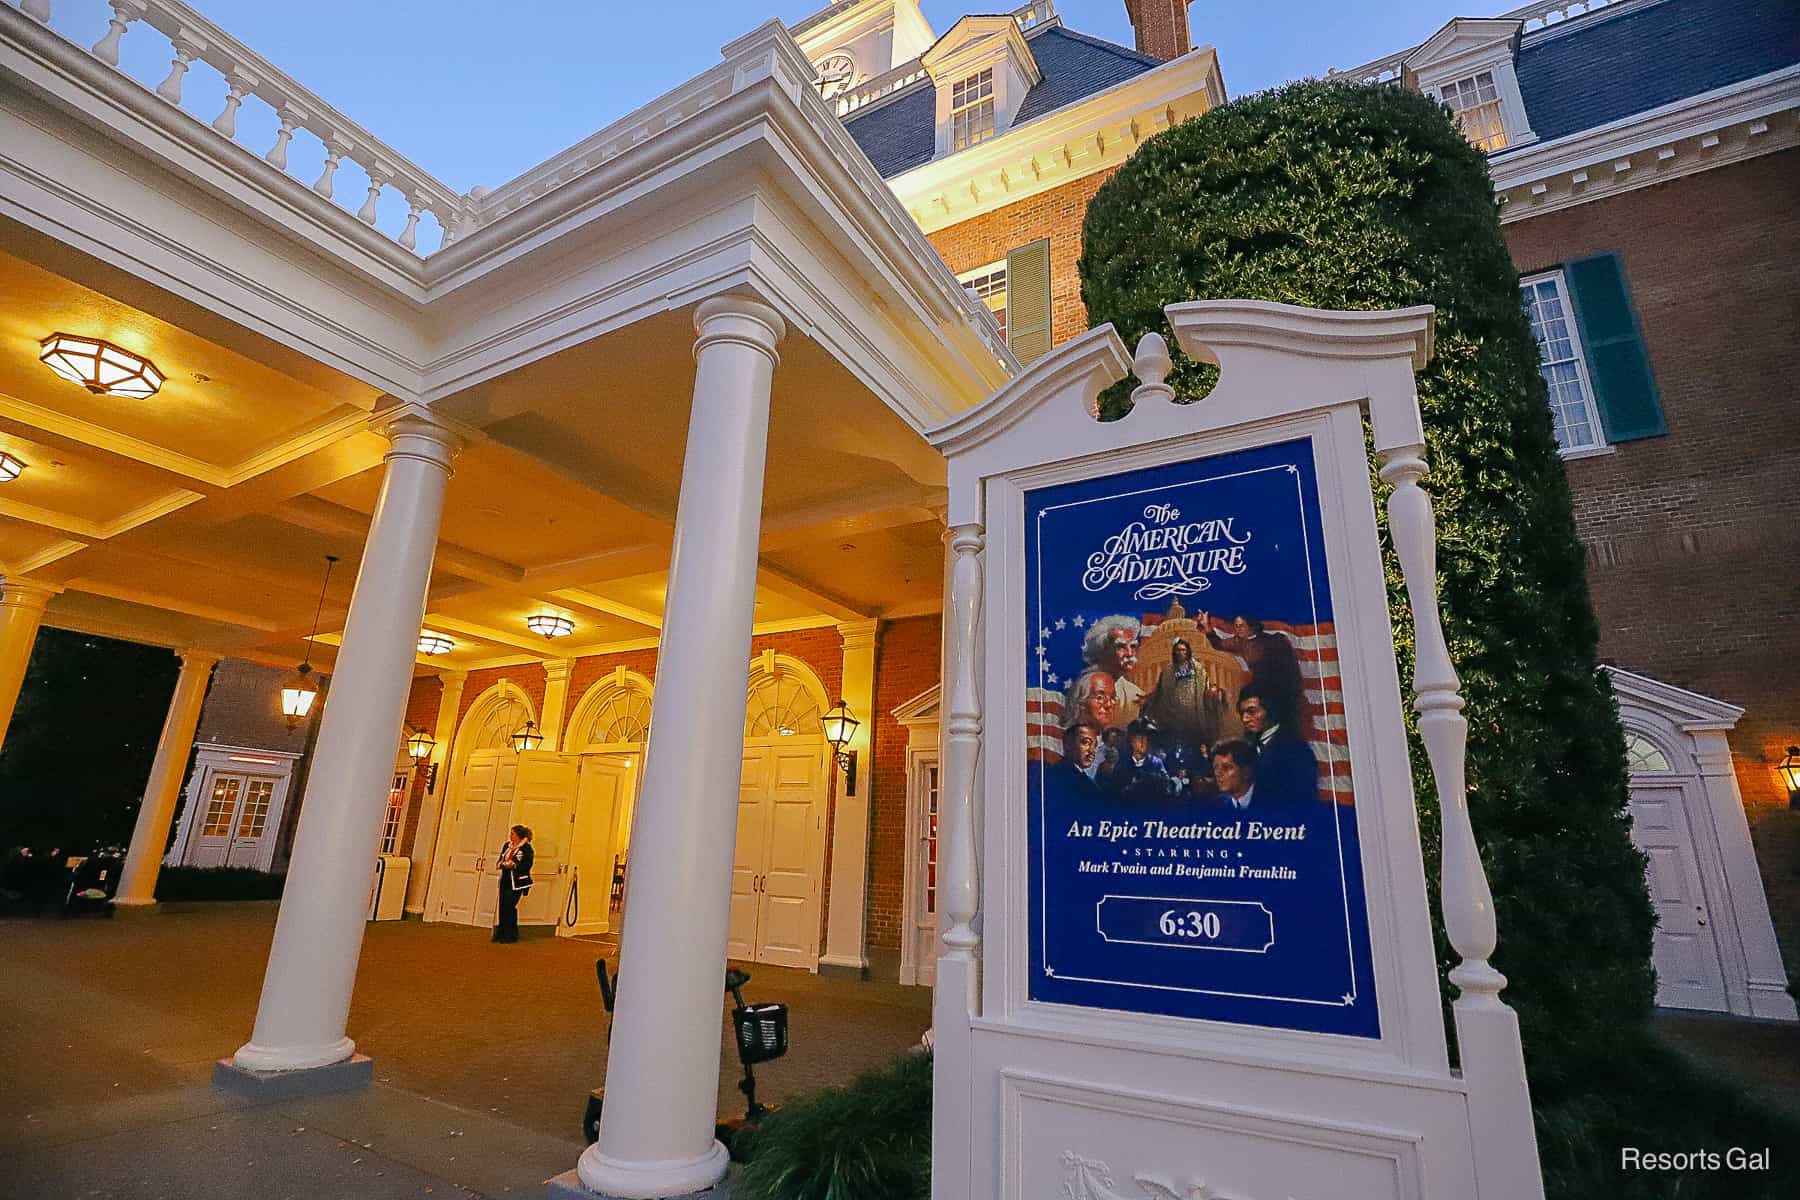 Signage for The American Adventure attraction, an Epic Theatrical Event 